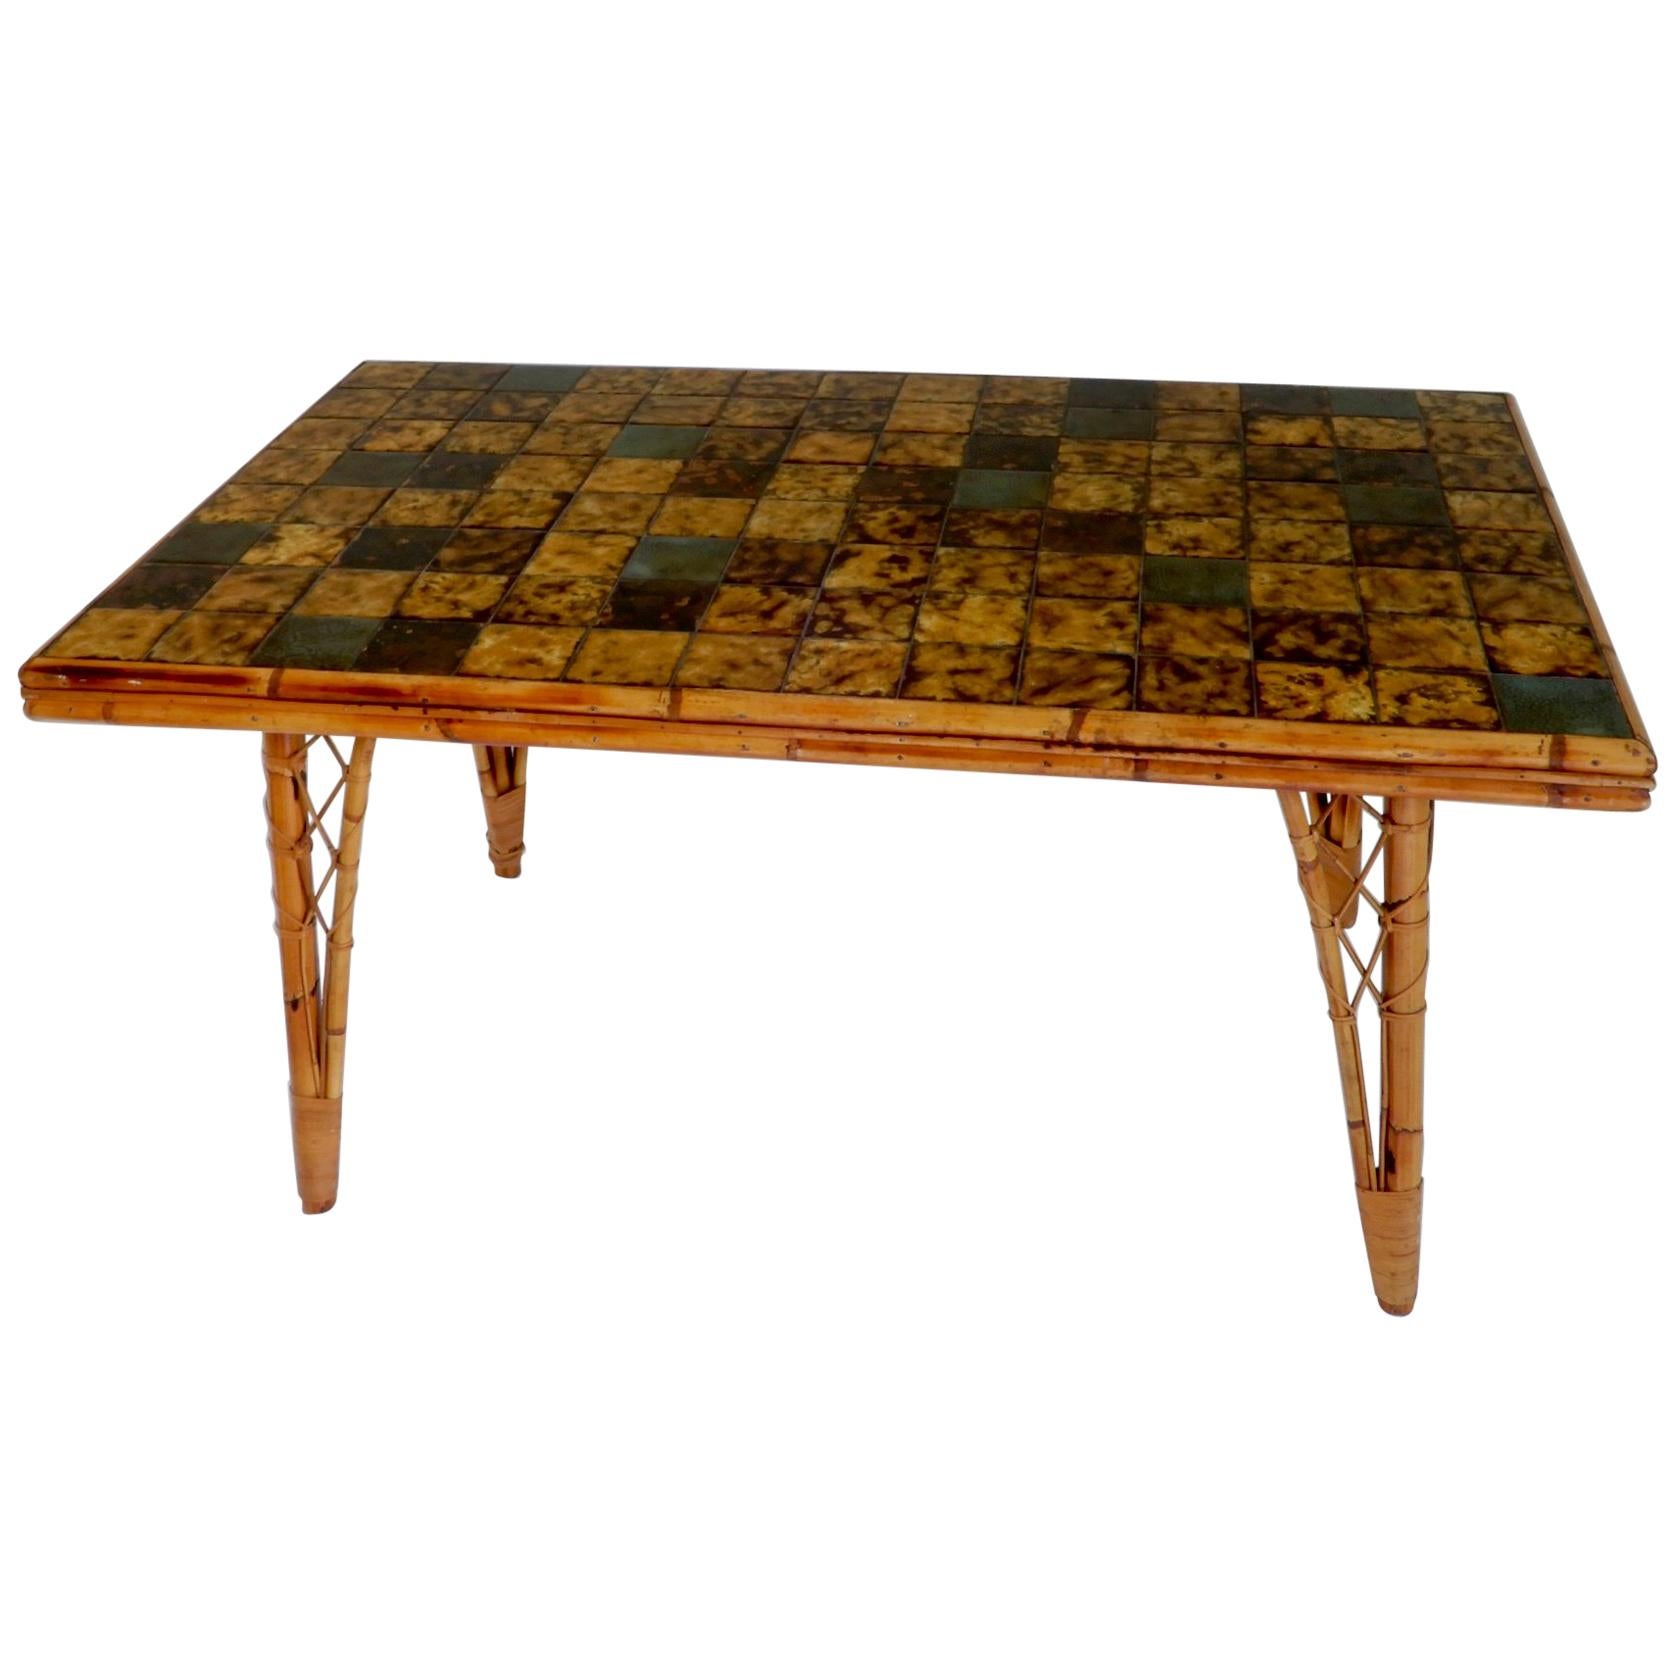 French Bamboo Dining Table with Ceramic Tile Top, 1950s For Sale